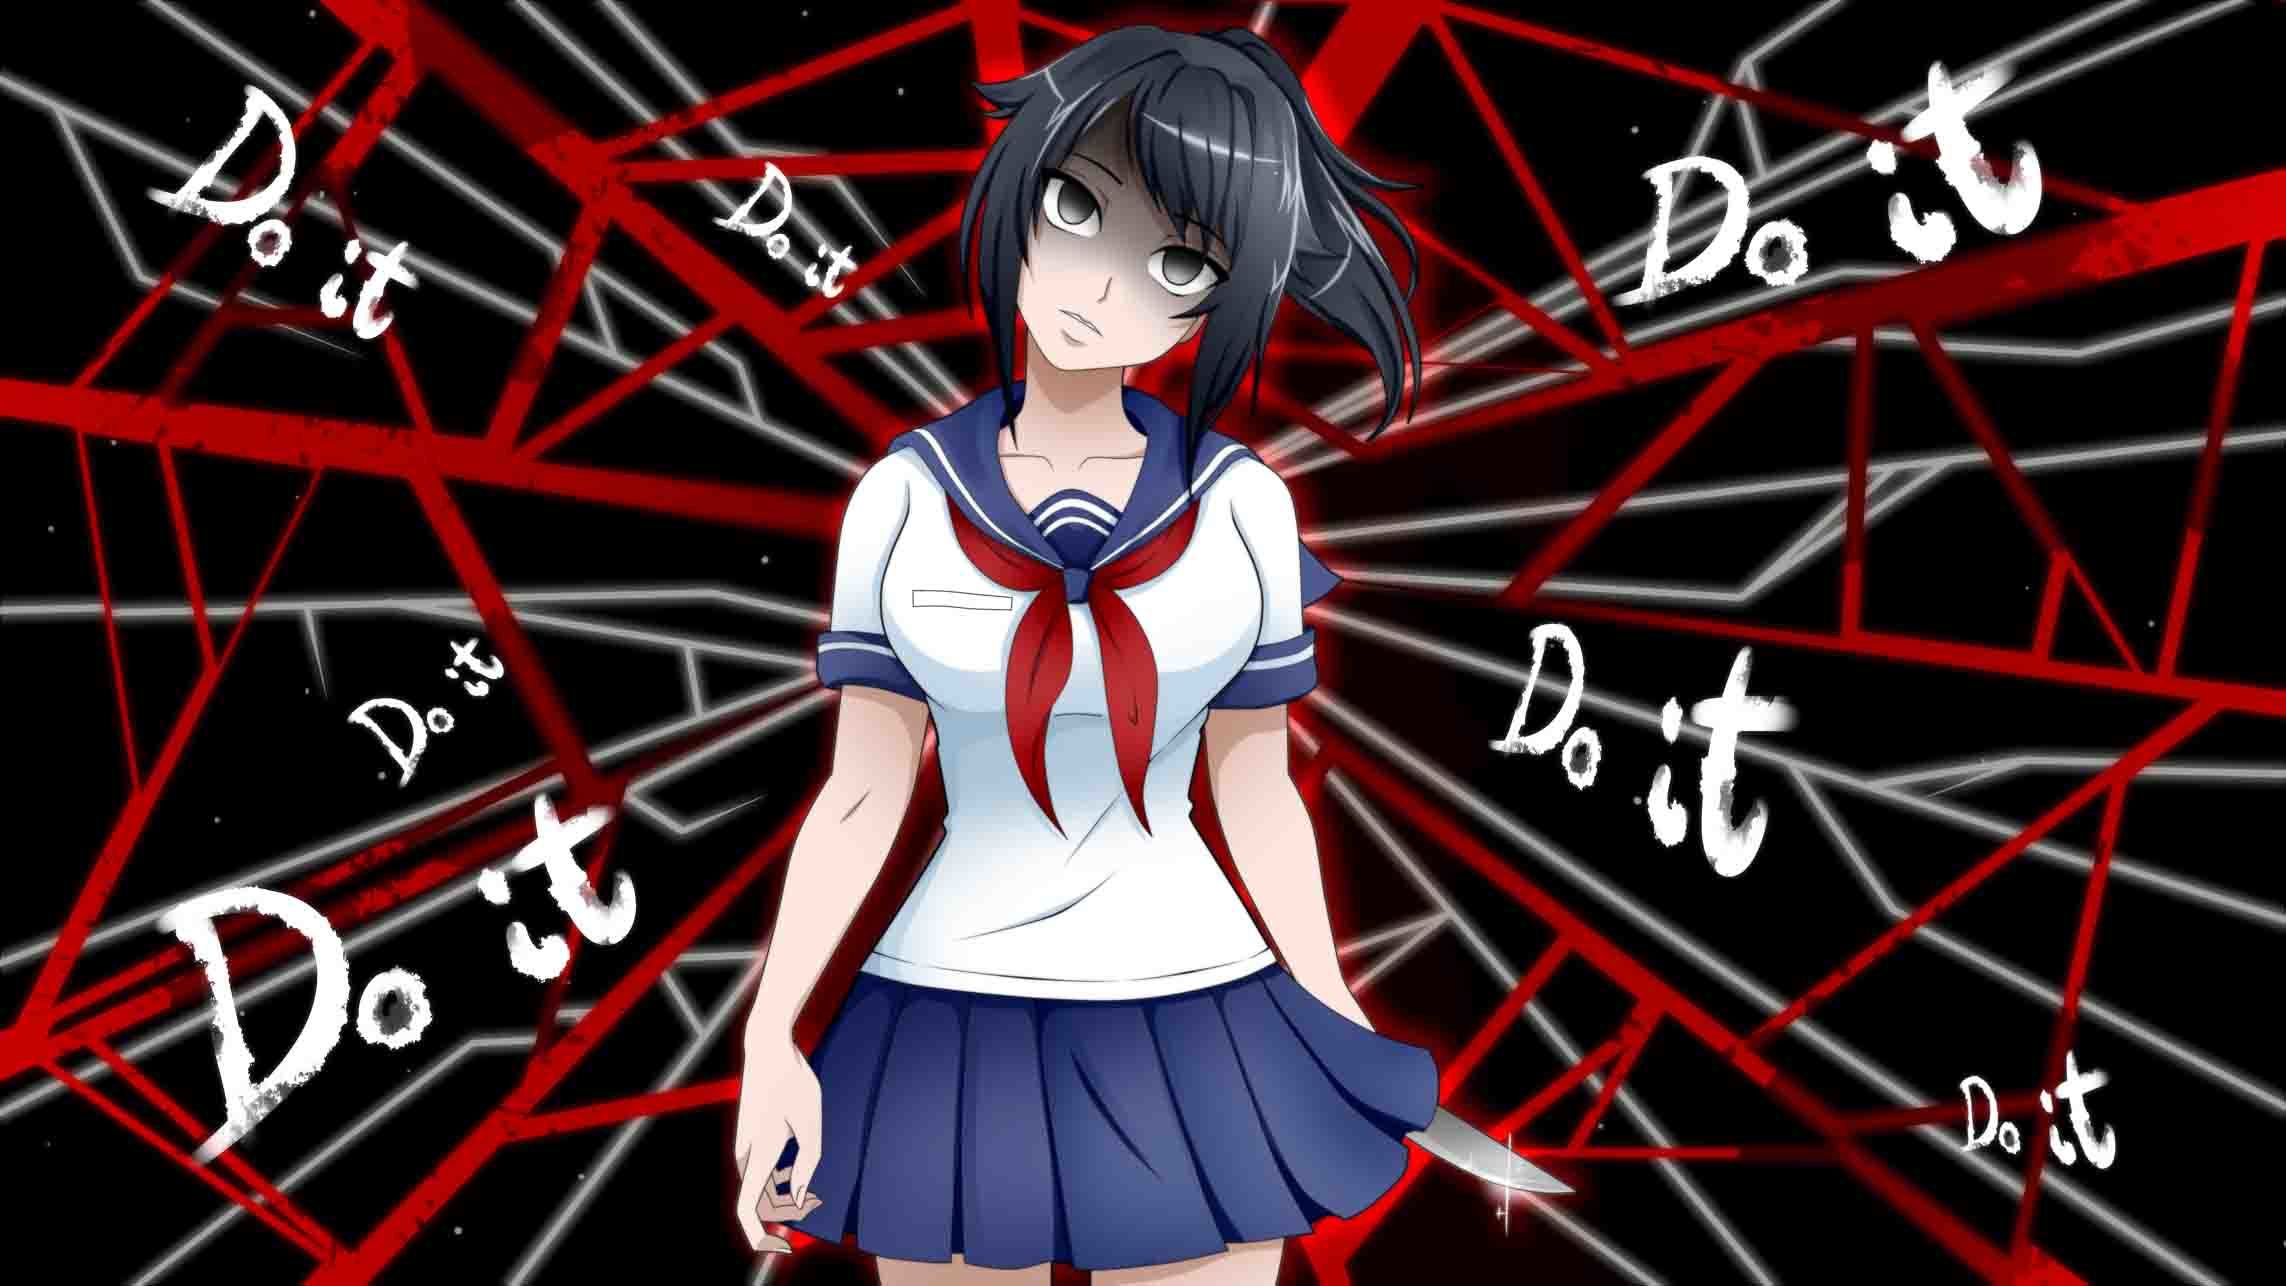 What is the Meaning of Yandere?